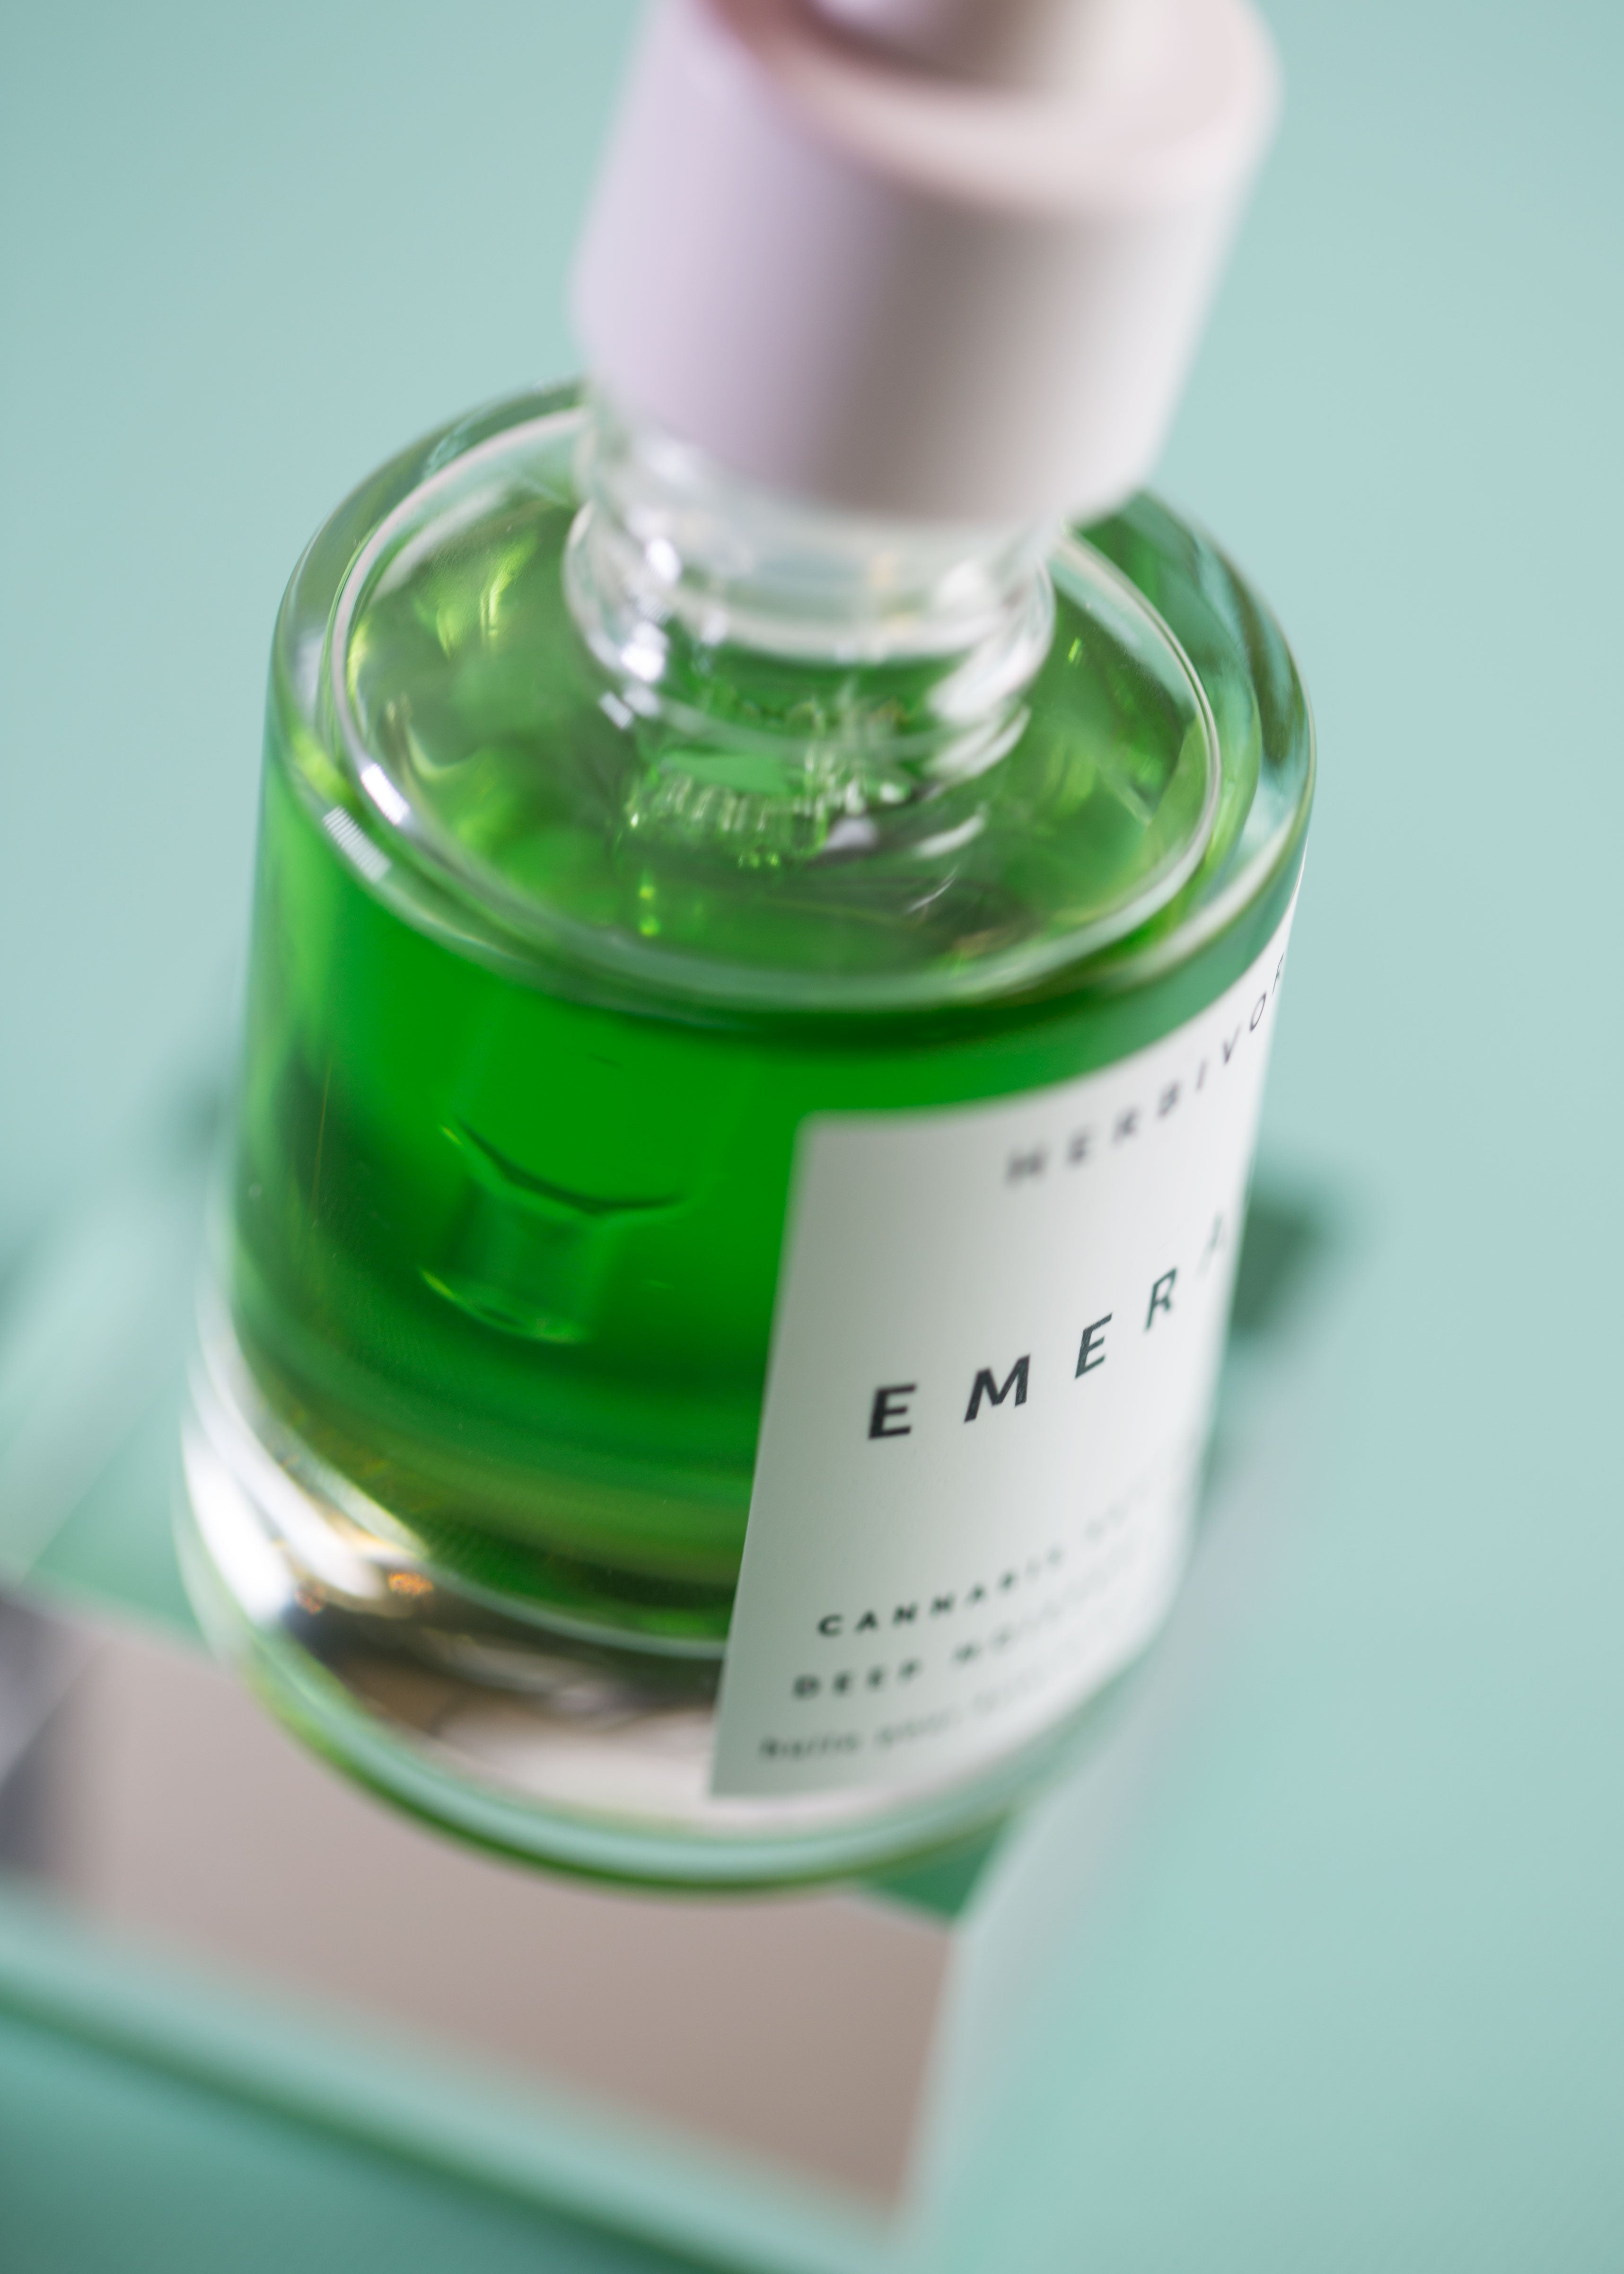 How to Use EMERALD Deep Moisture Glow Oil in Your Skincare Routine